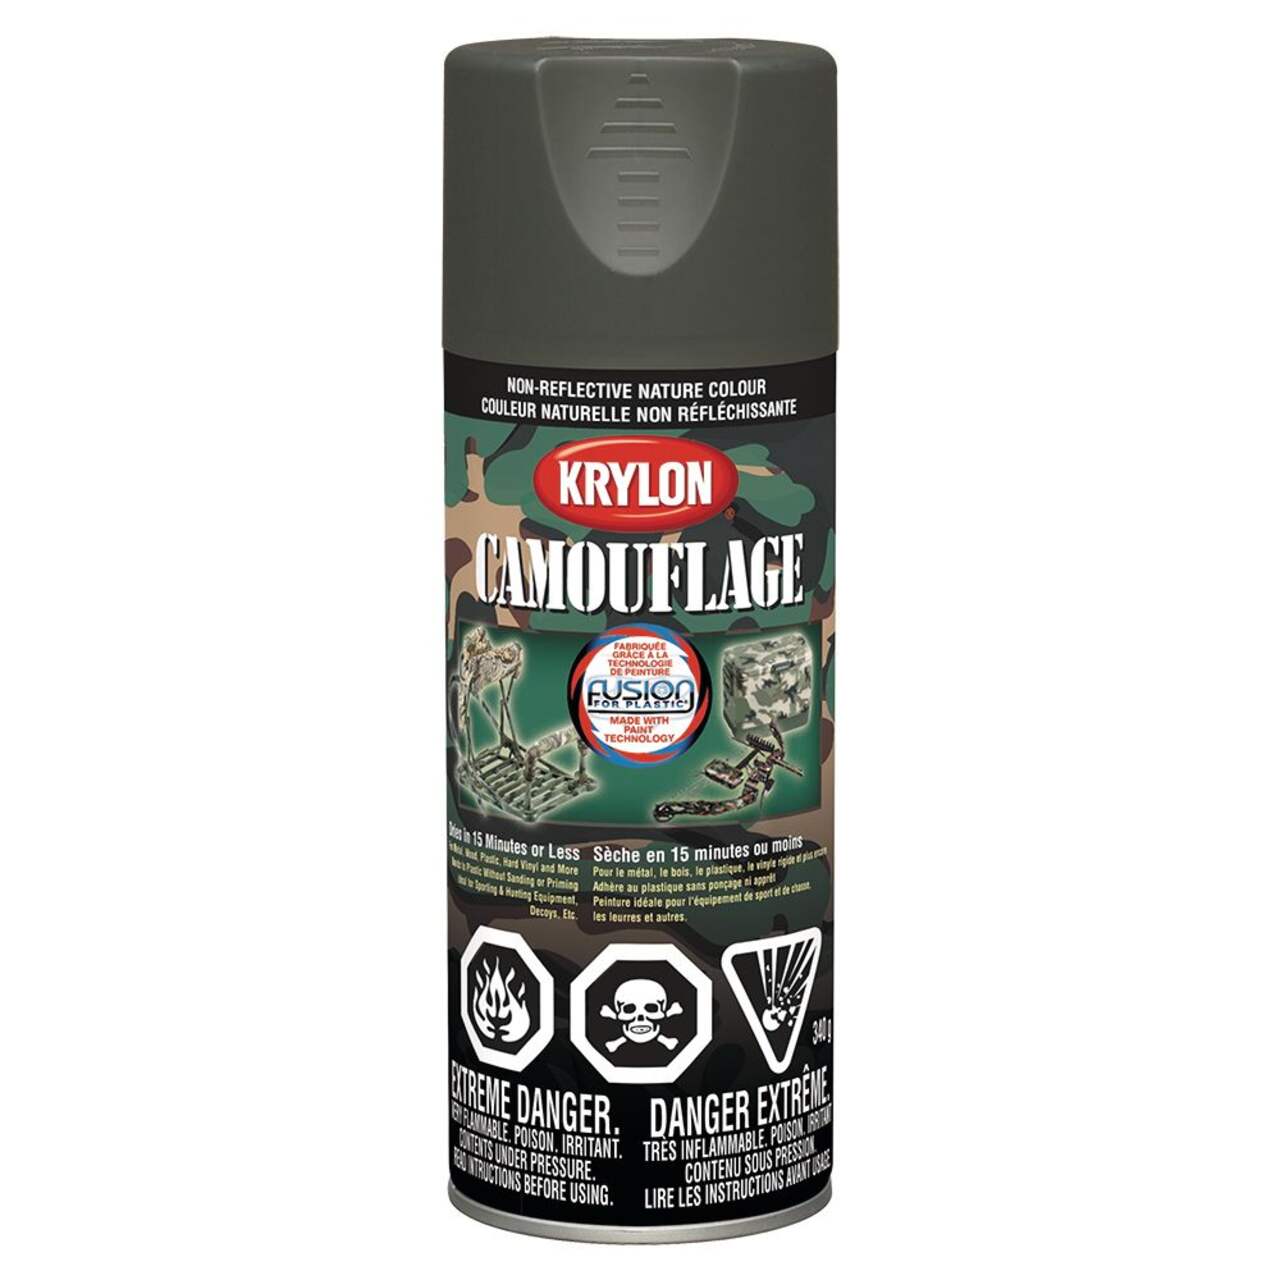 Krylon Paint and Primer - All-in-One - 340 g - Jungle Green